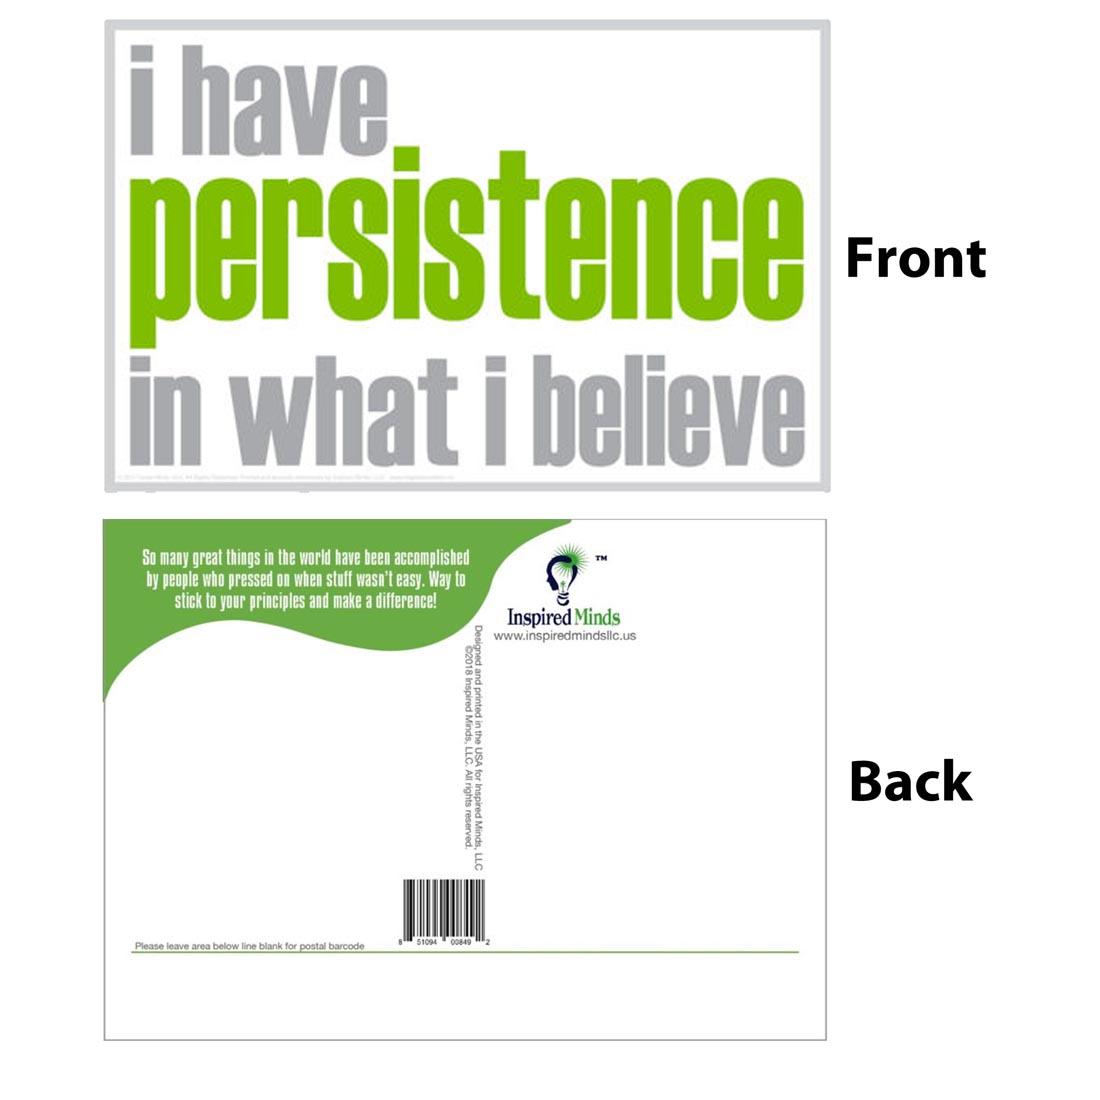 Front and back of the I Have Persistence In What I Believe Postcard